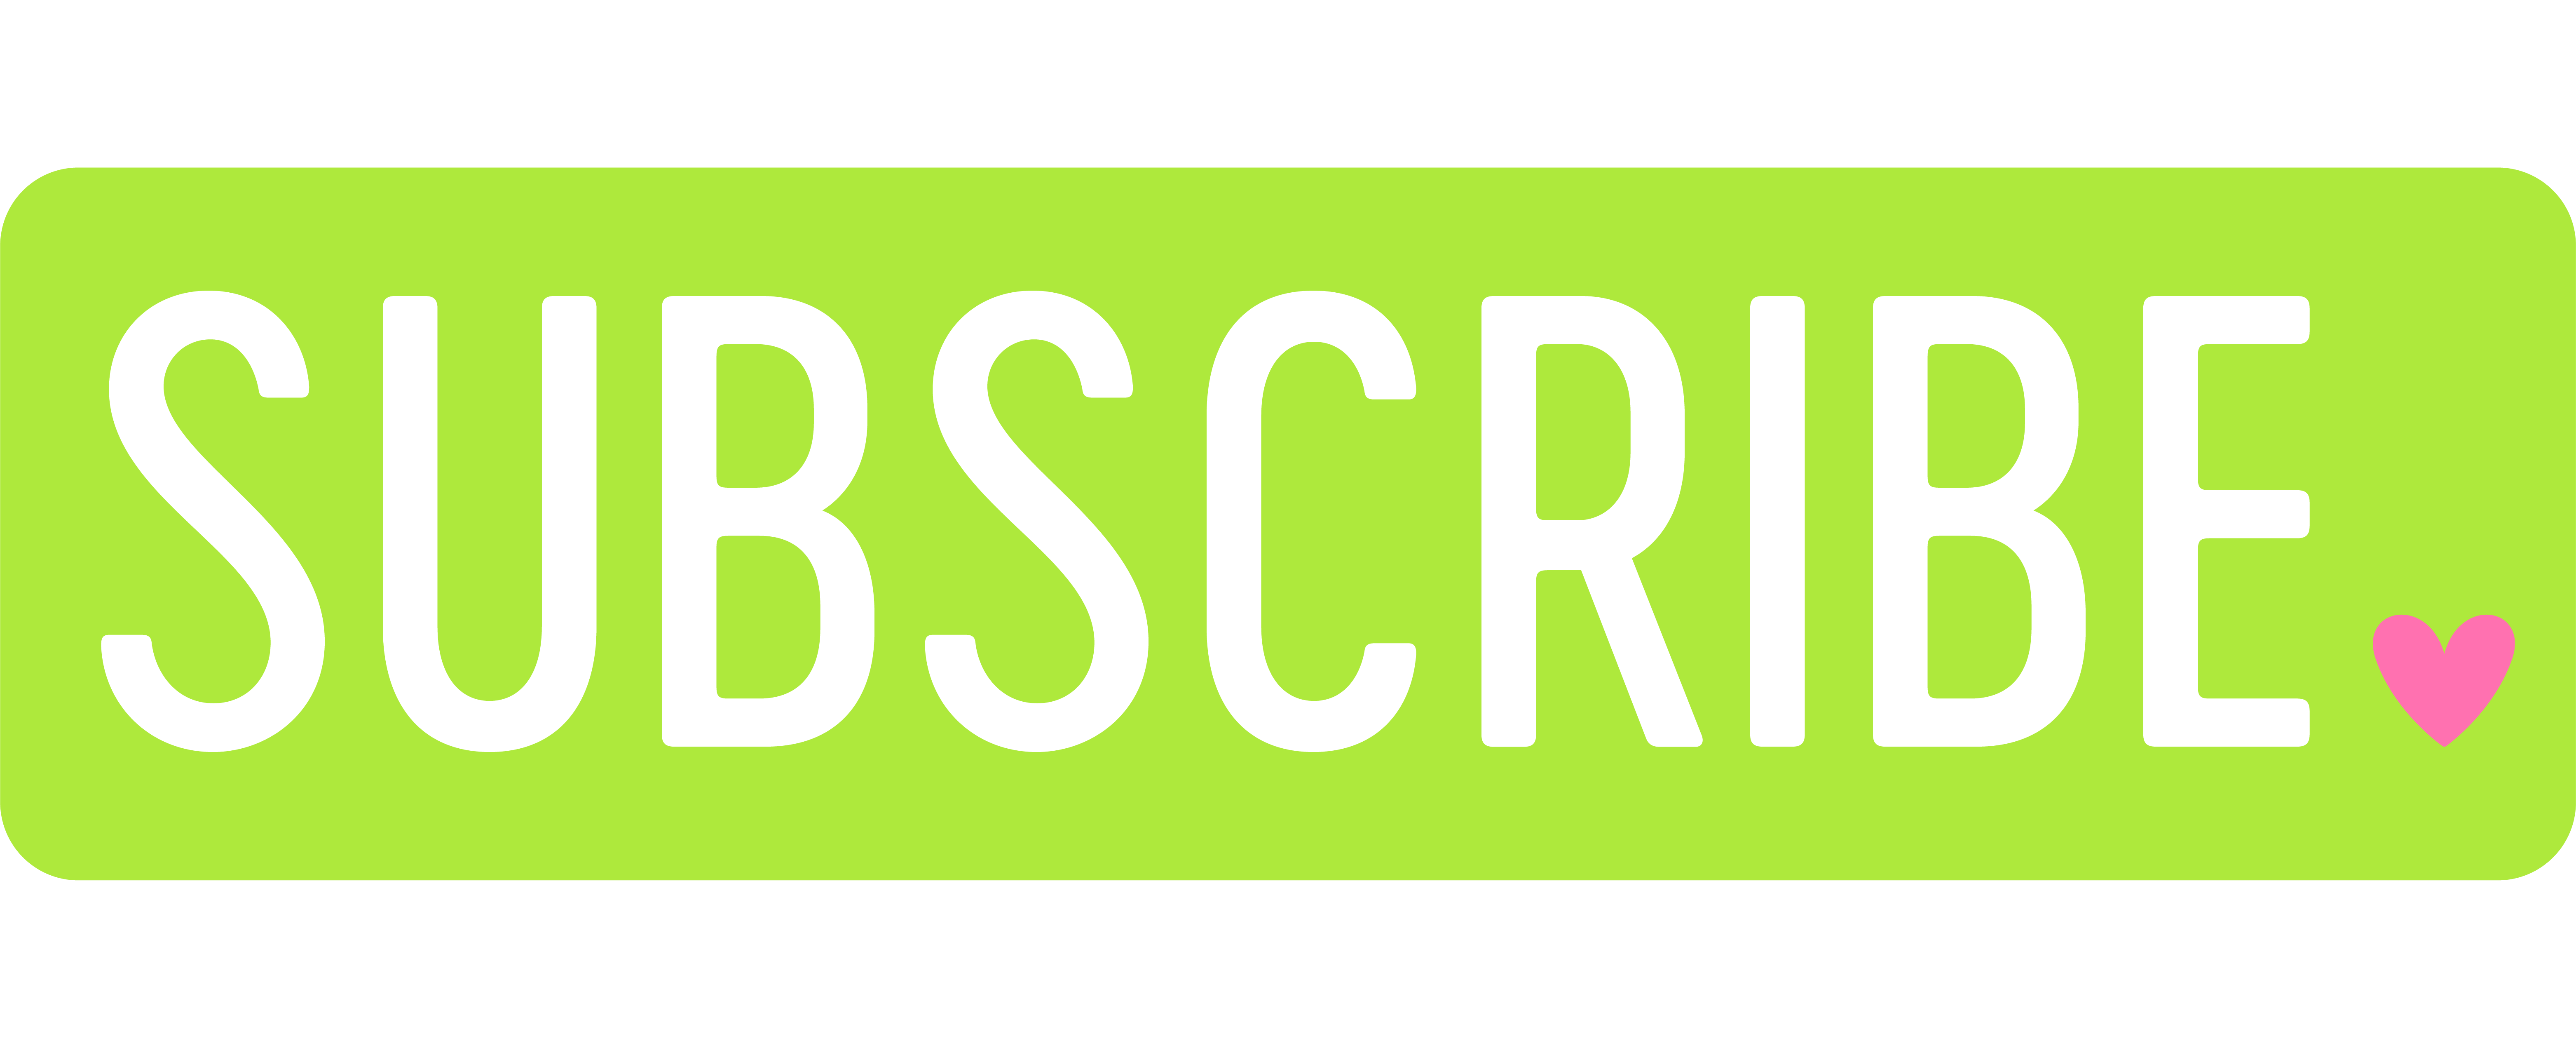 Youtube Subscribe Button PNG Image with Transparent Background